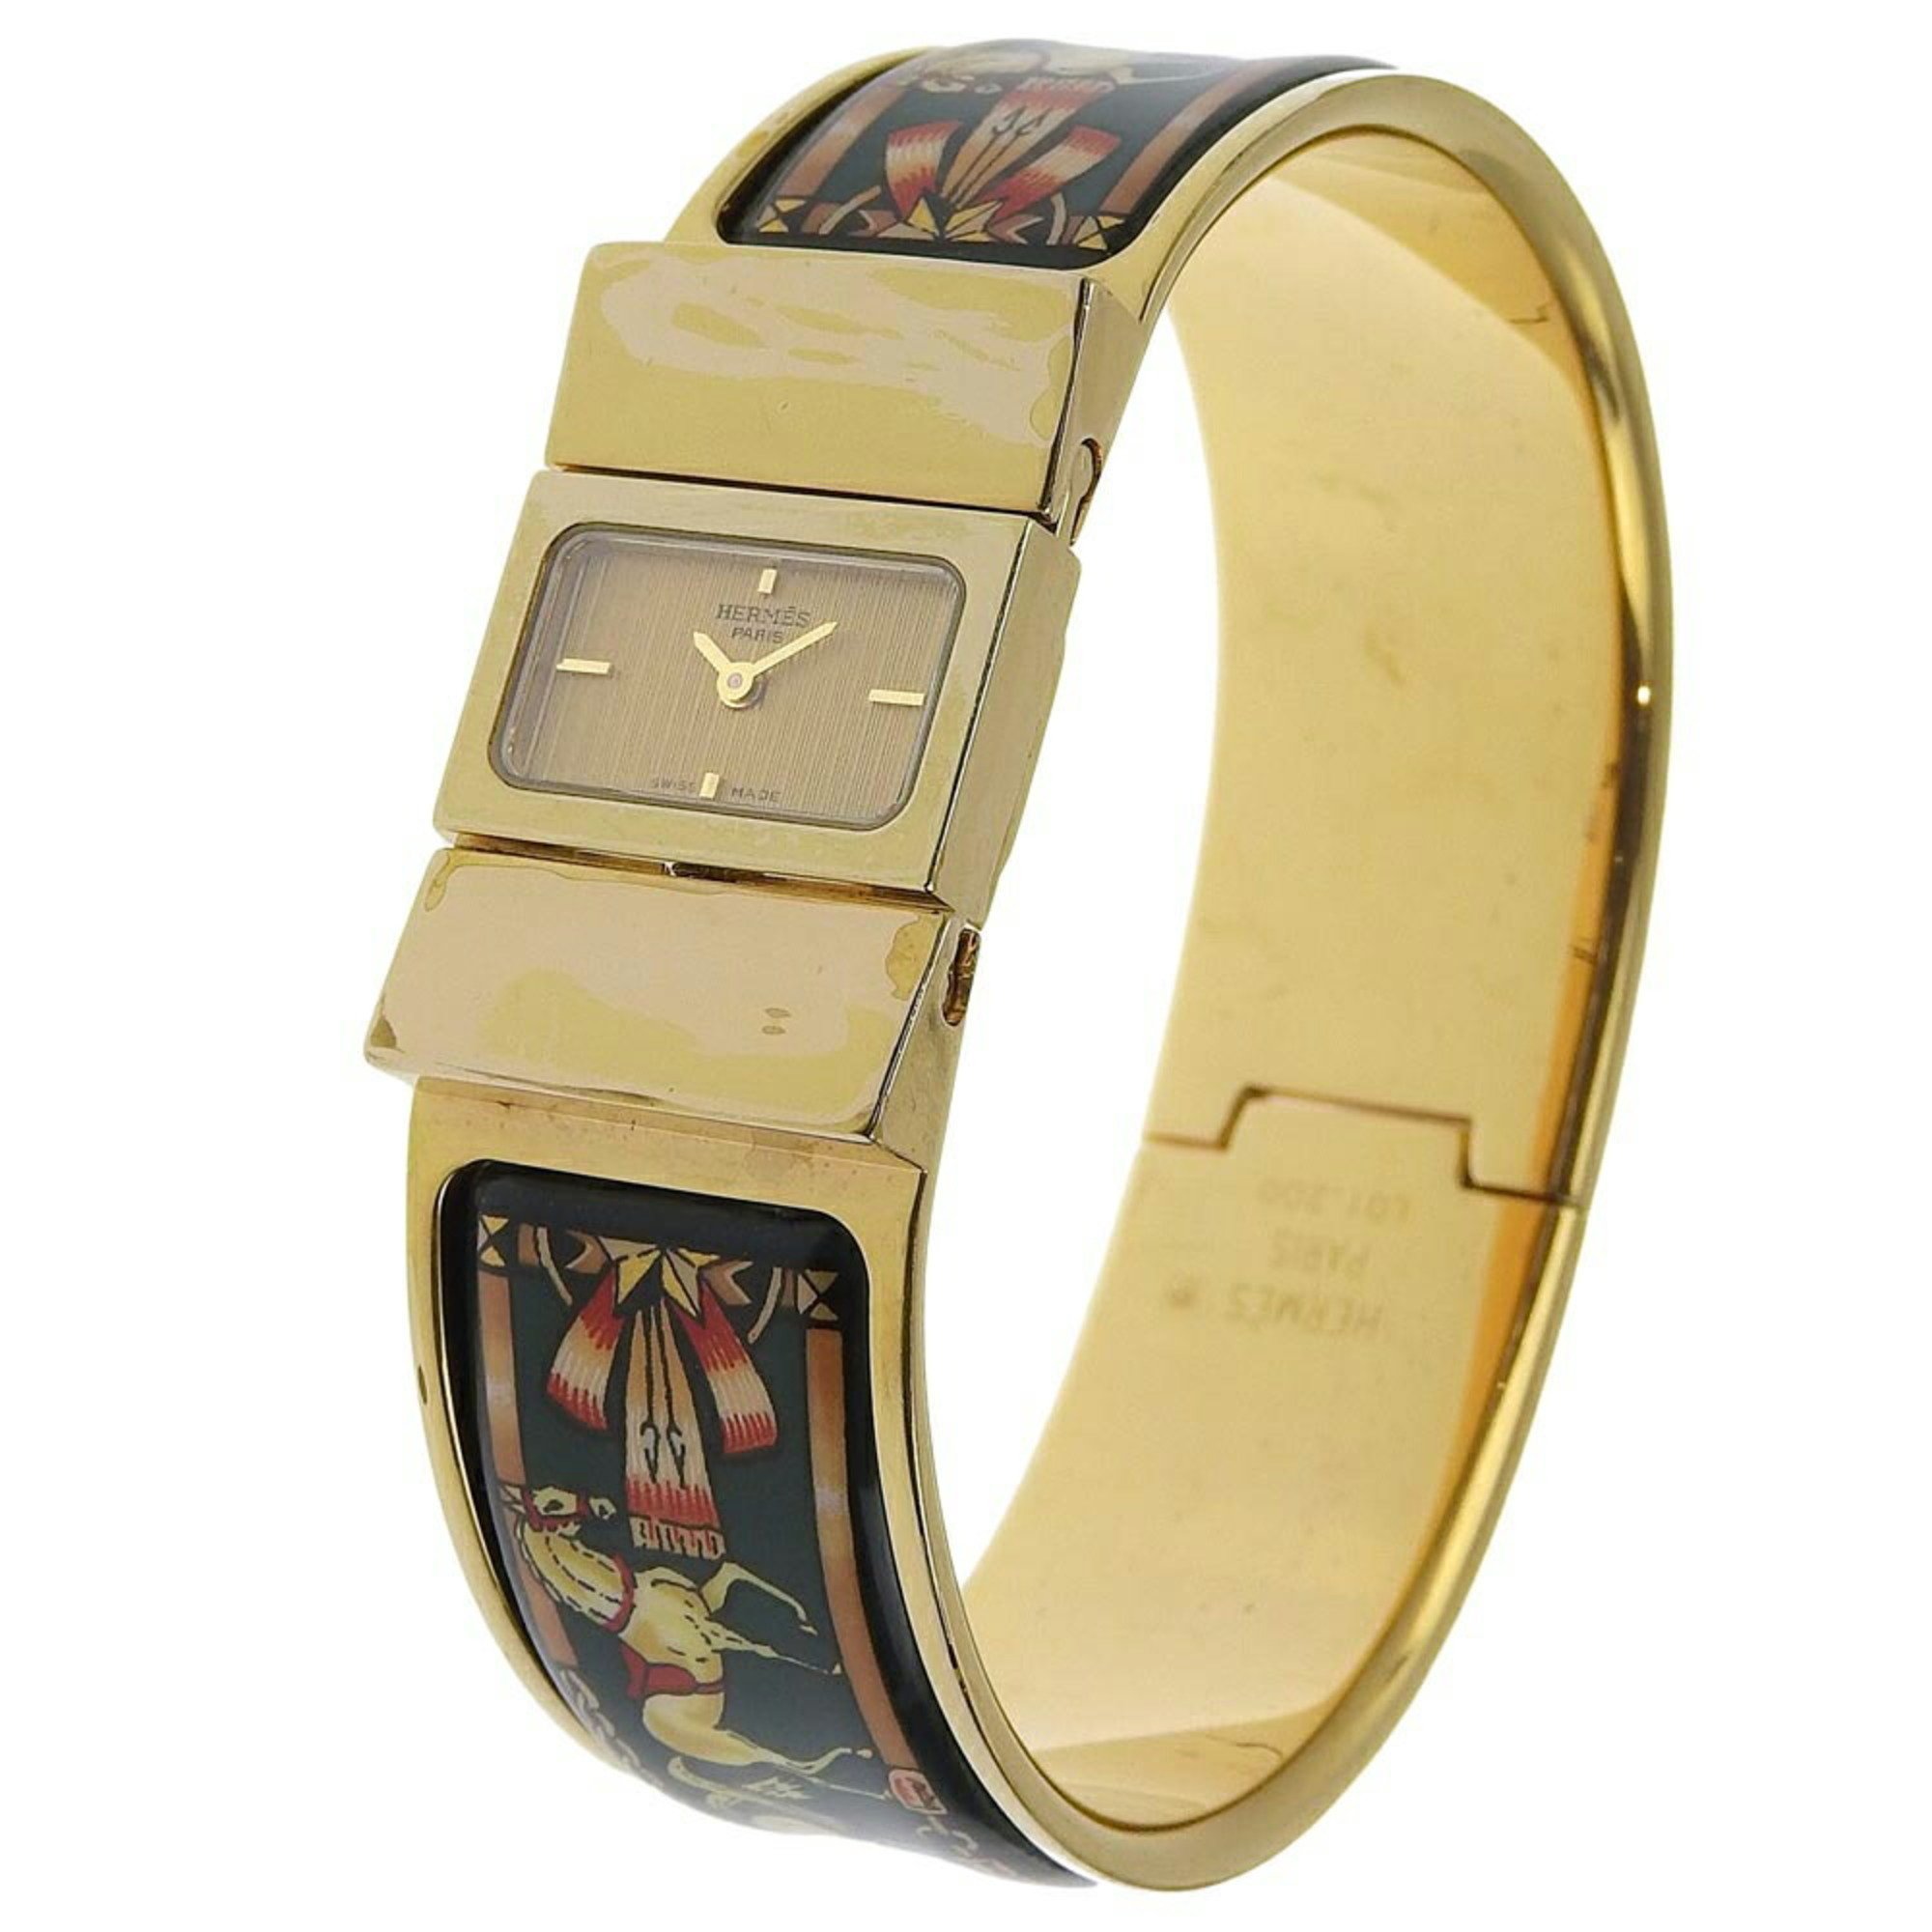 HERMES Location Watch Cloisonné LO1.201 Gold Plated Swiss Made Green Quartz Analog Display Dial Ladies